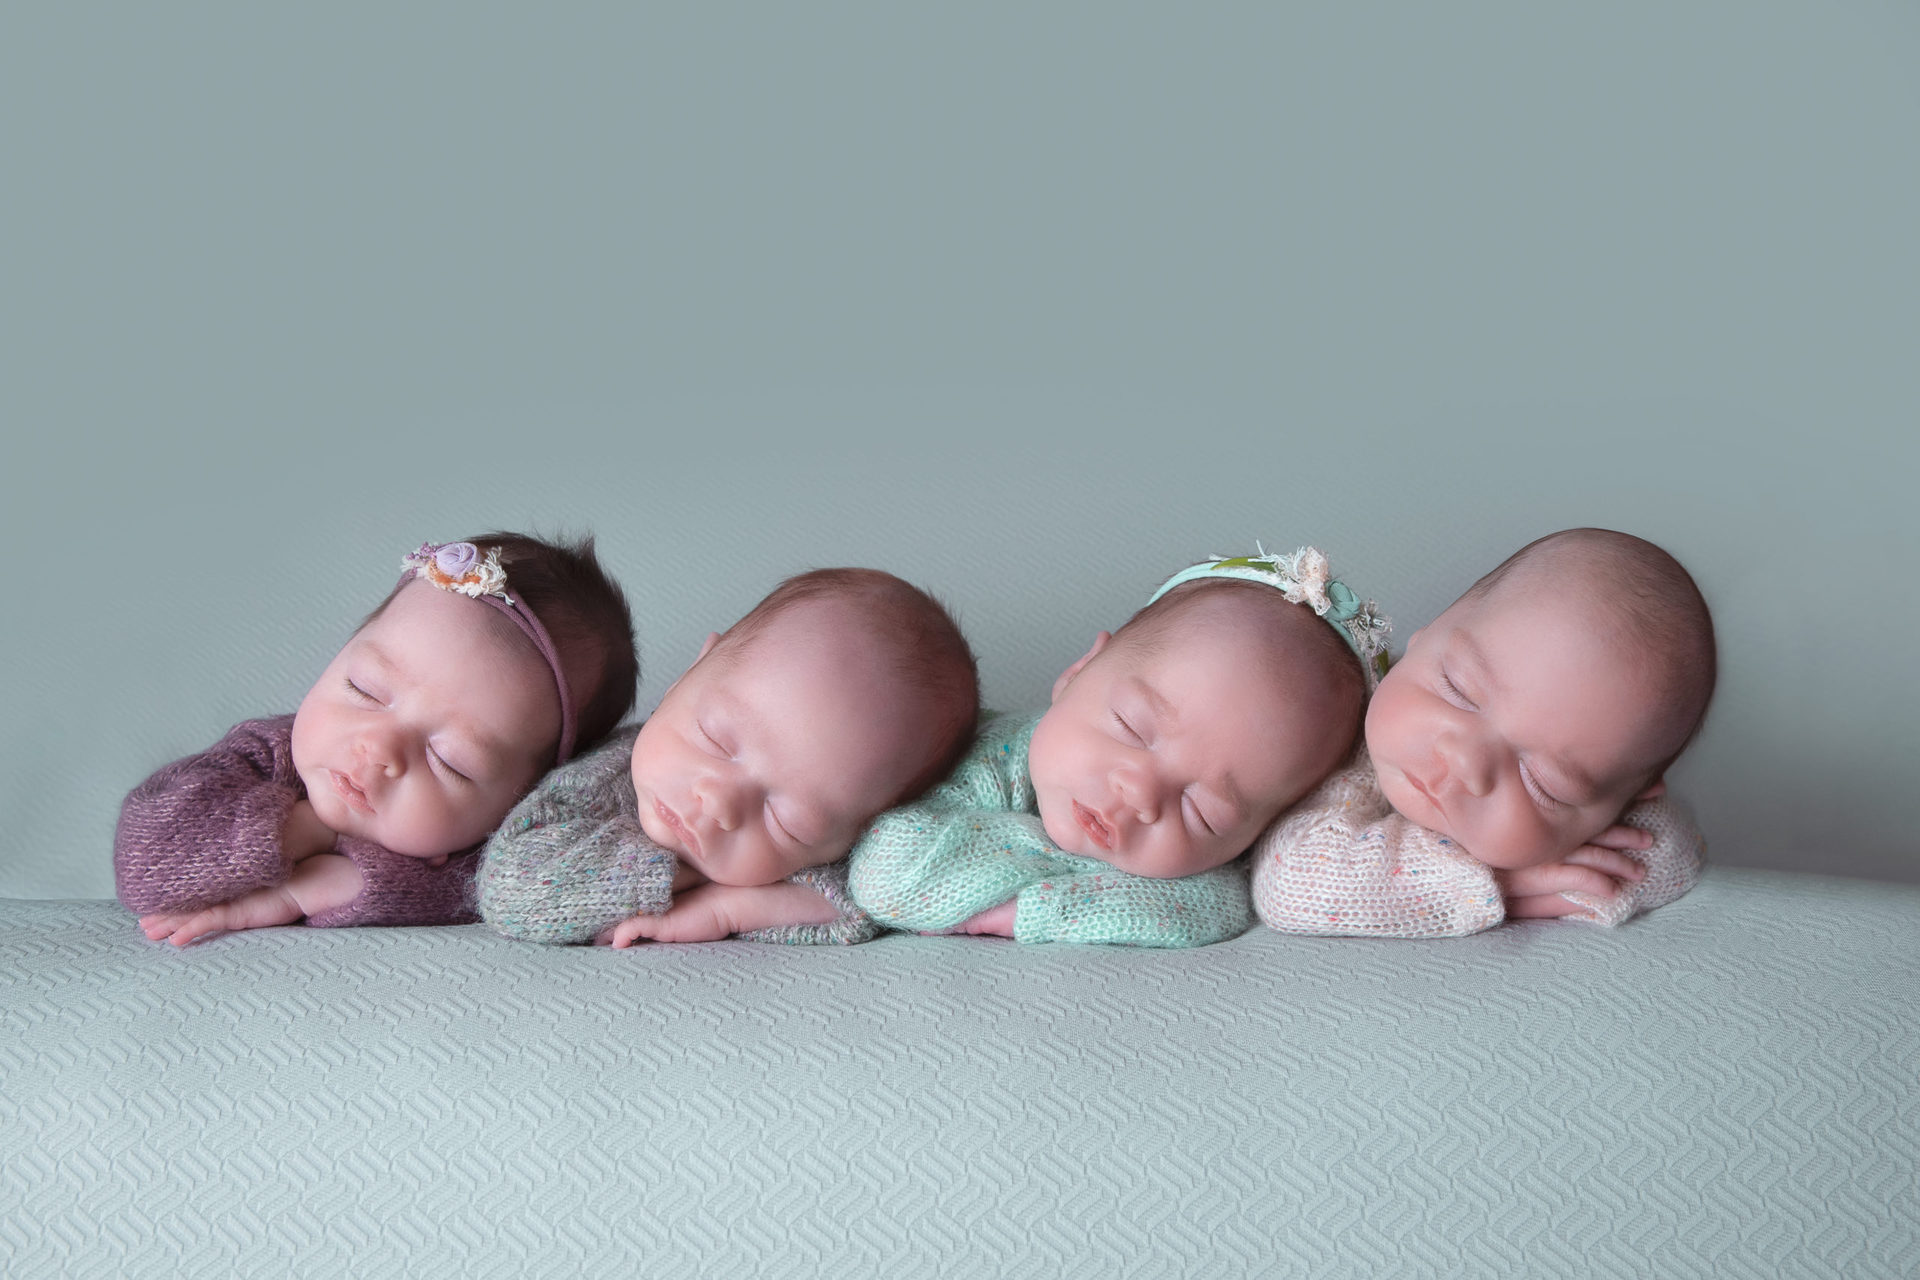 4 newborn siblings posing indoors on light green backdrop. Straight on angle shot. Girls wear purple and green outfits and headbands, while boys wear gray and light colored outfits.